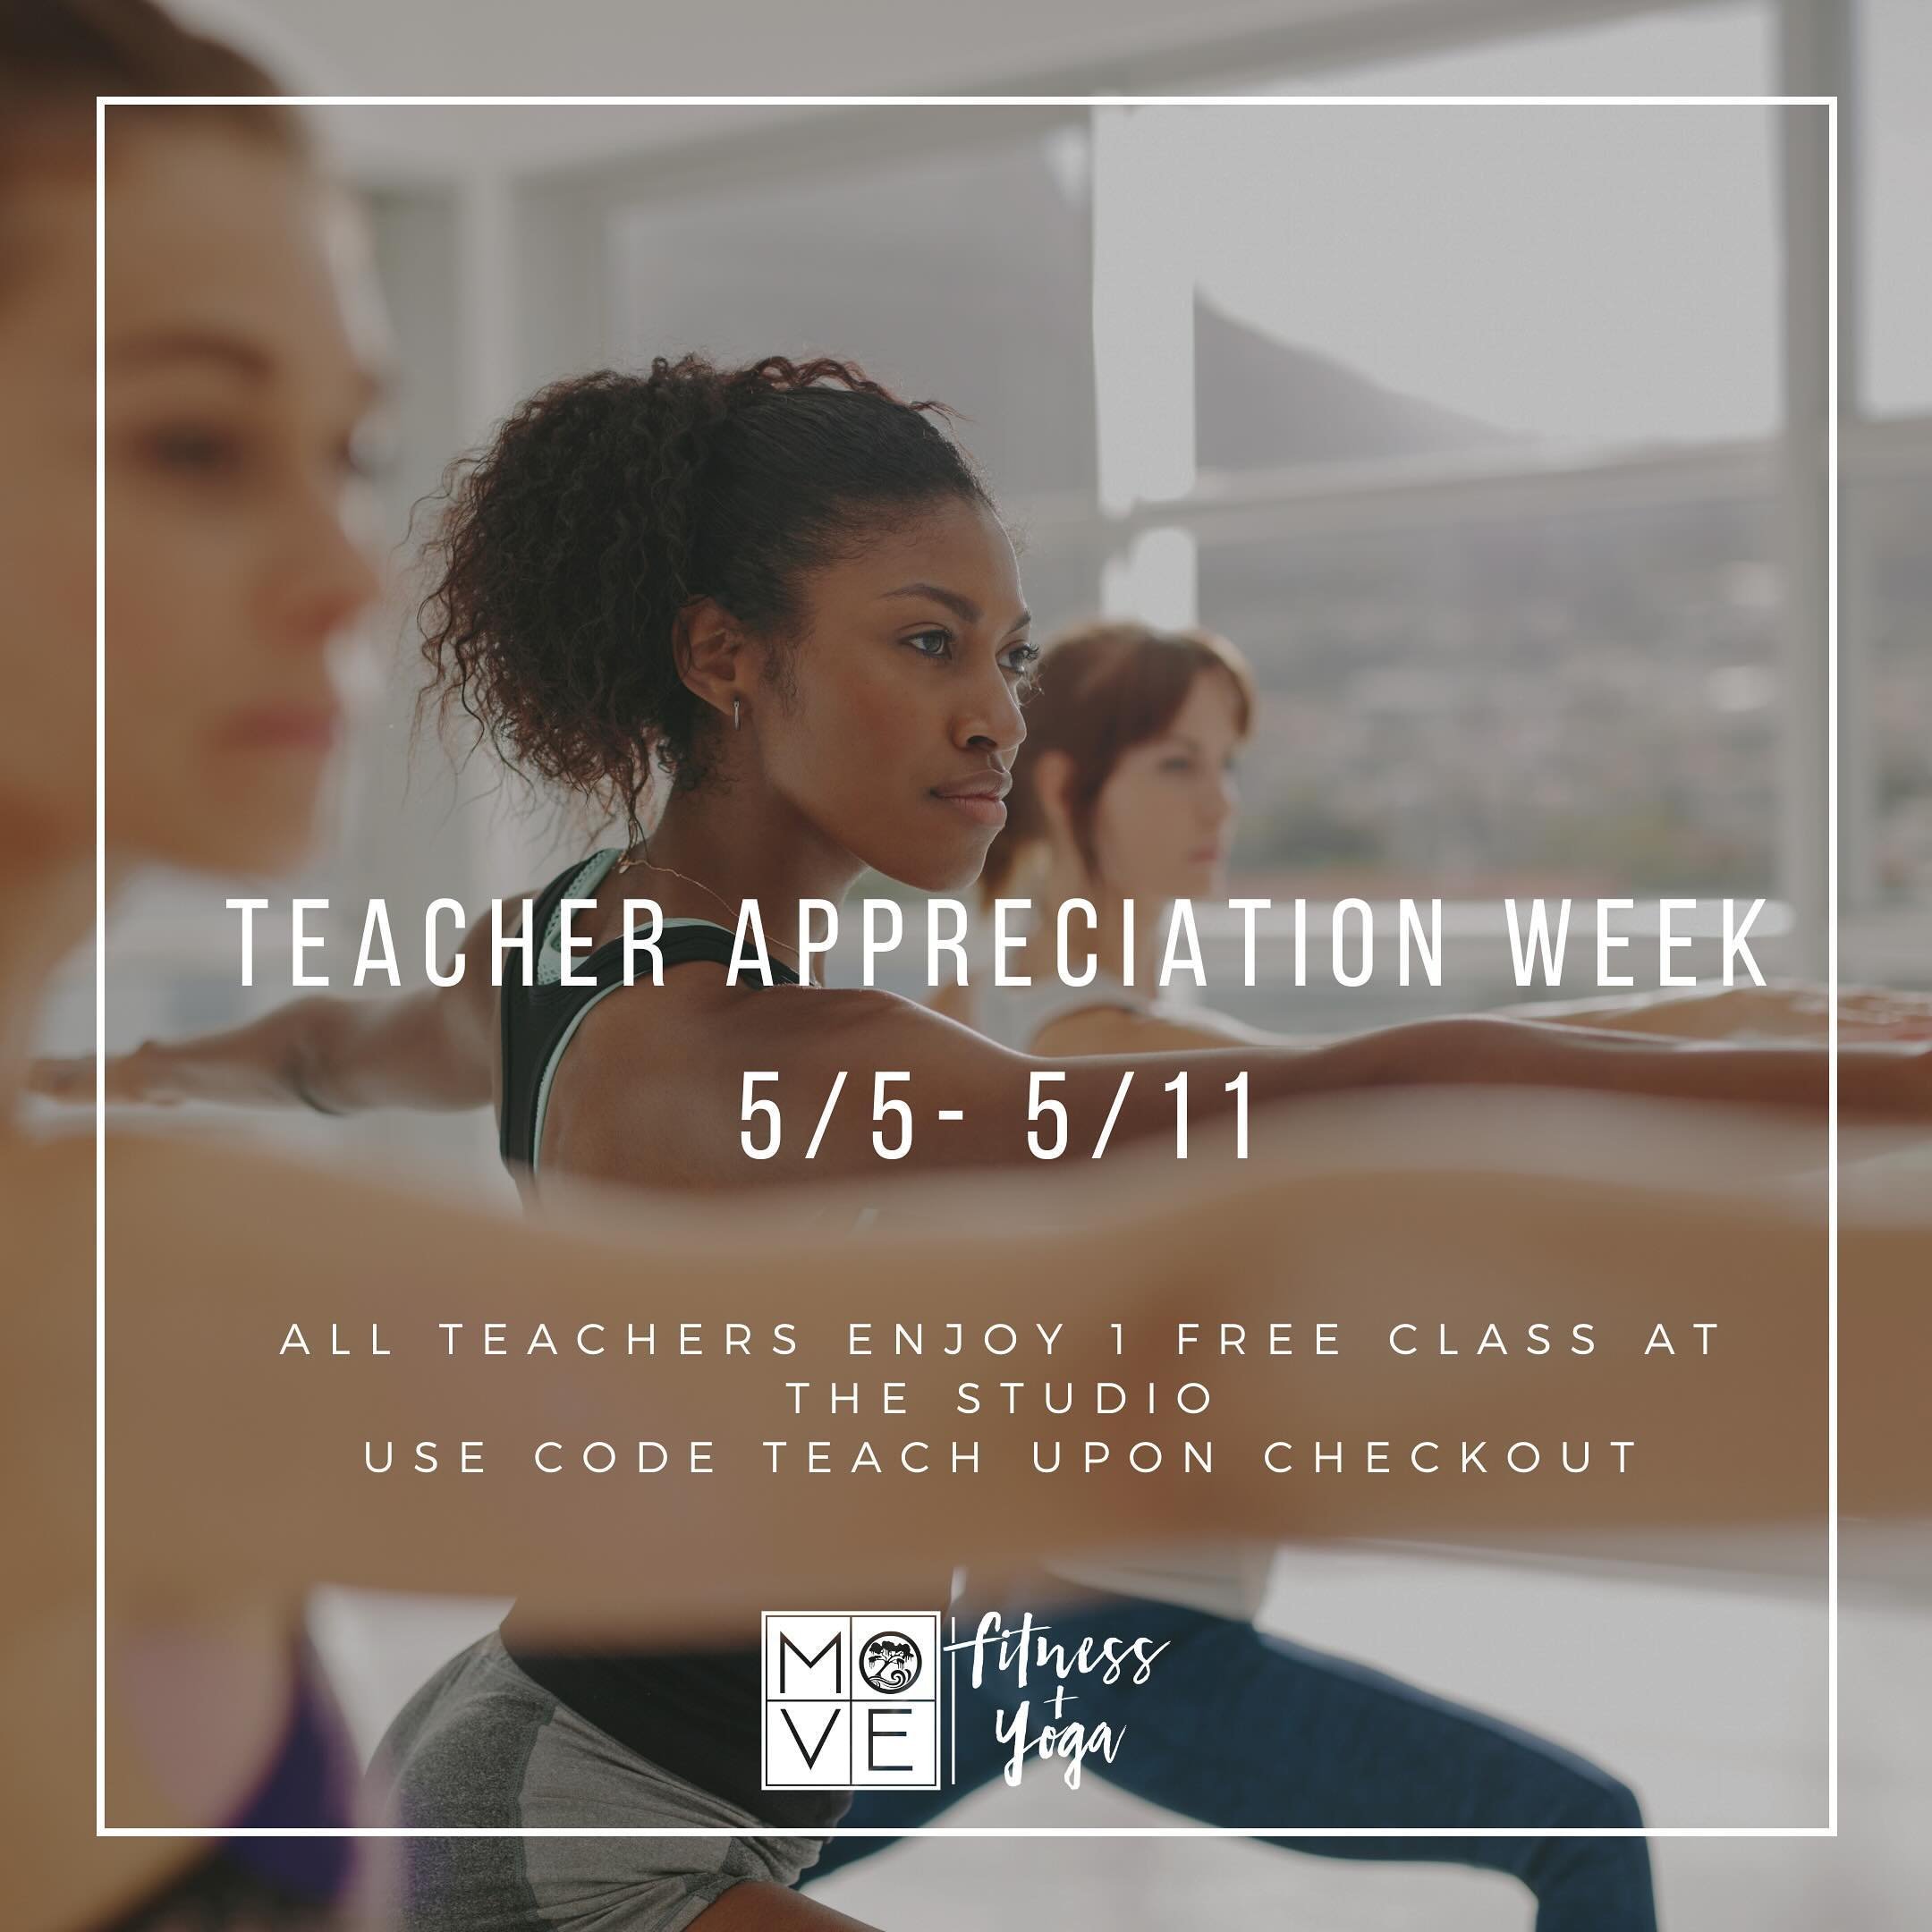 We LOVE our teachers! As a former elementary educator myself, I know how much a labor of love teaching can really be. Teacher Appreciation week is coming up from May 6-10th and to show our appreciation, all teachers and teacher assistants can enjoy 1